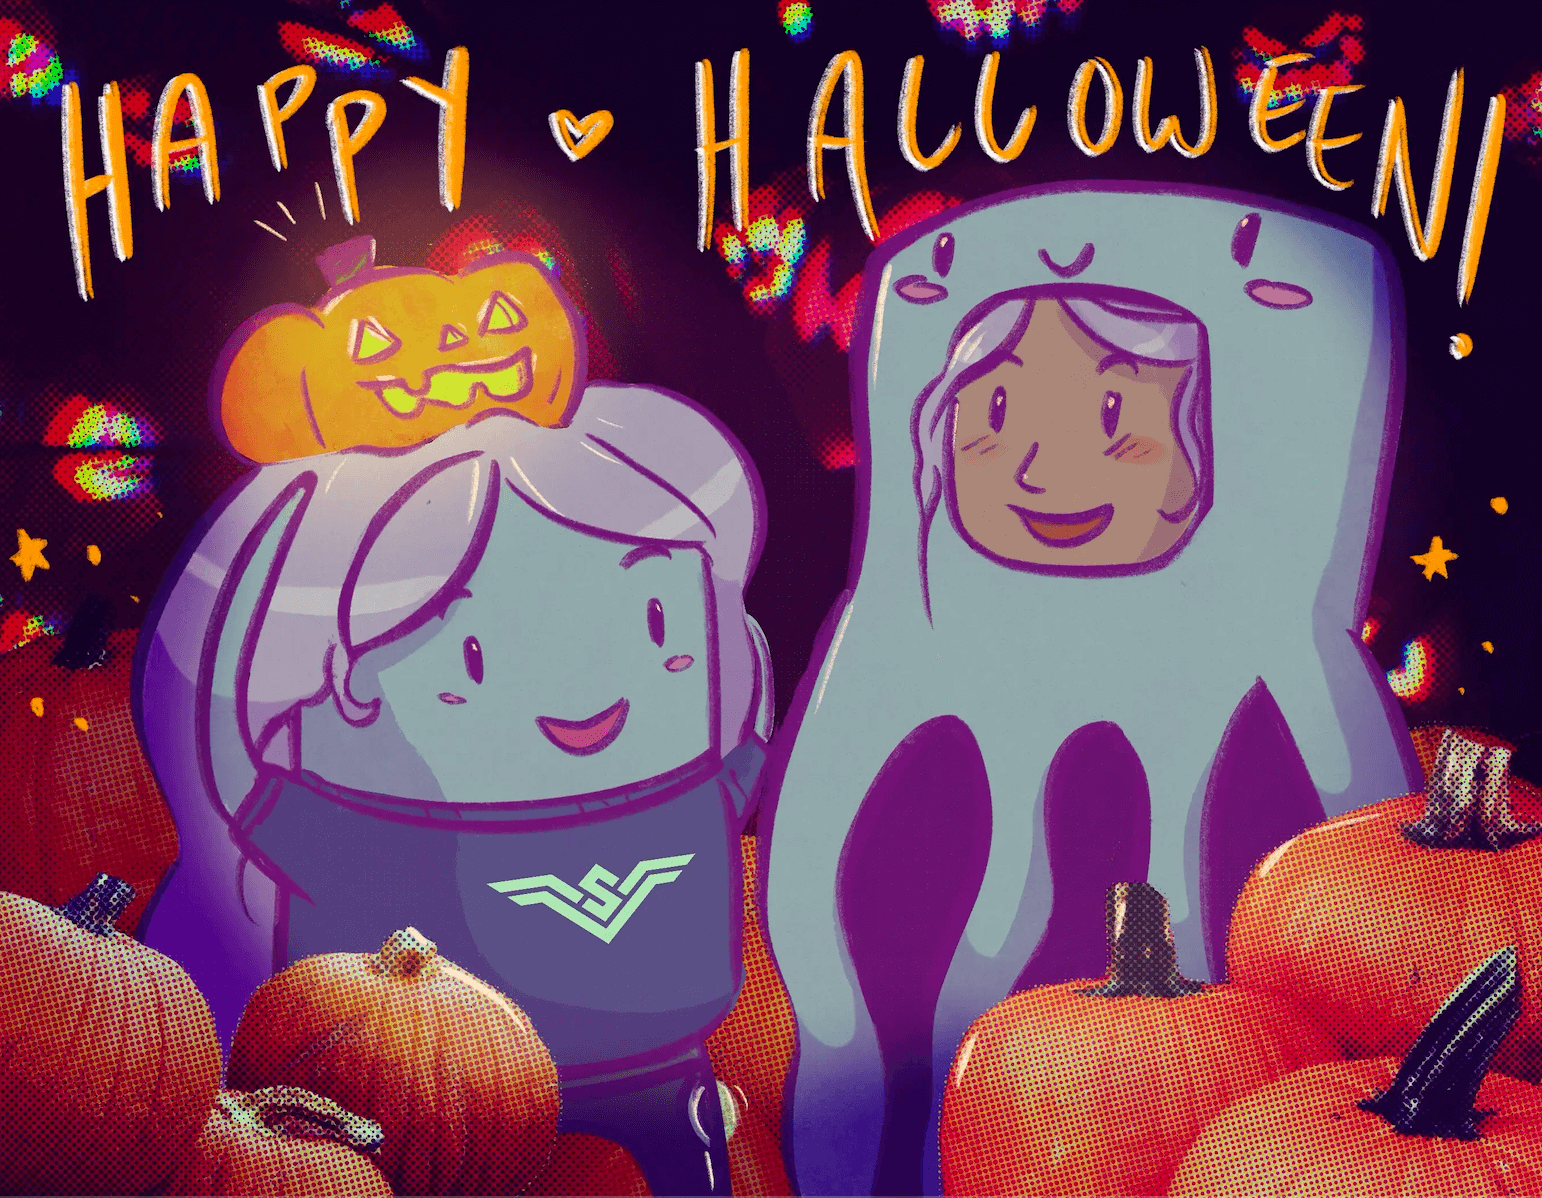 Shocky and Sophia Bot dressed as each other for Halloween